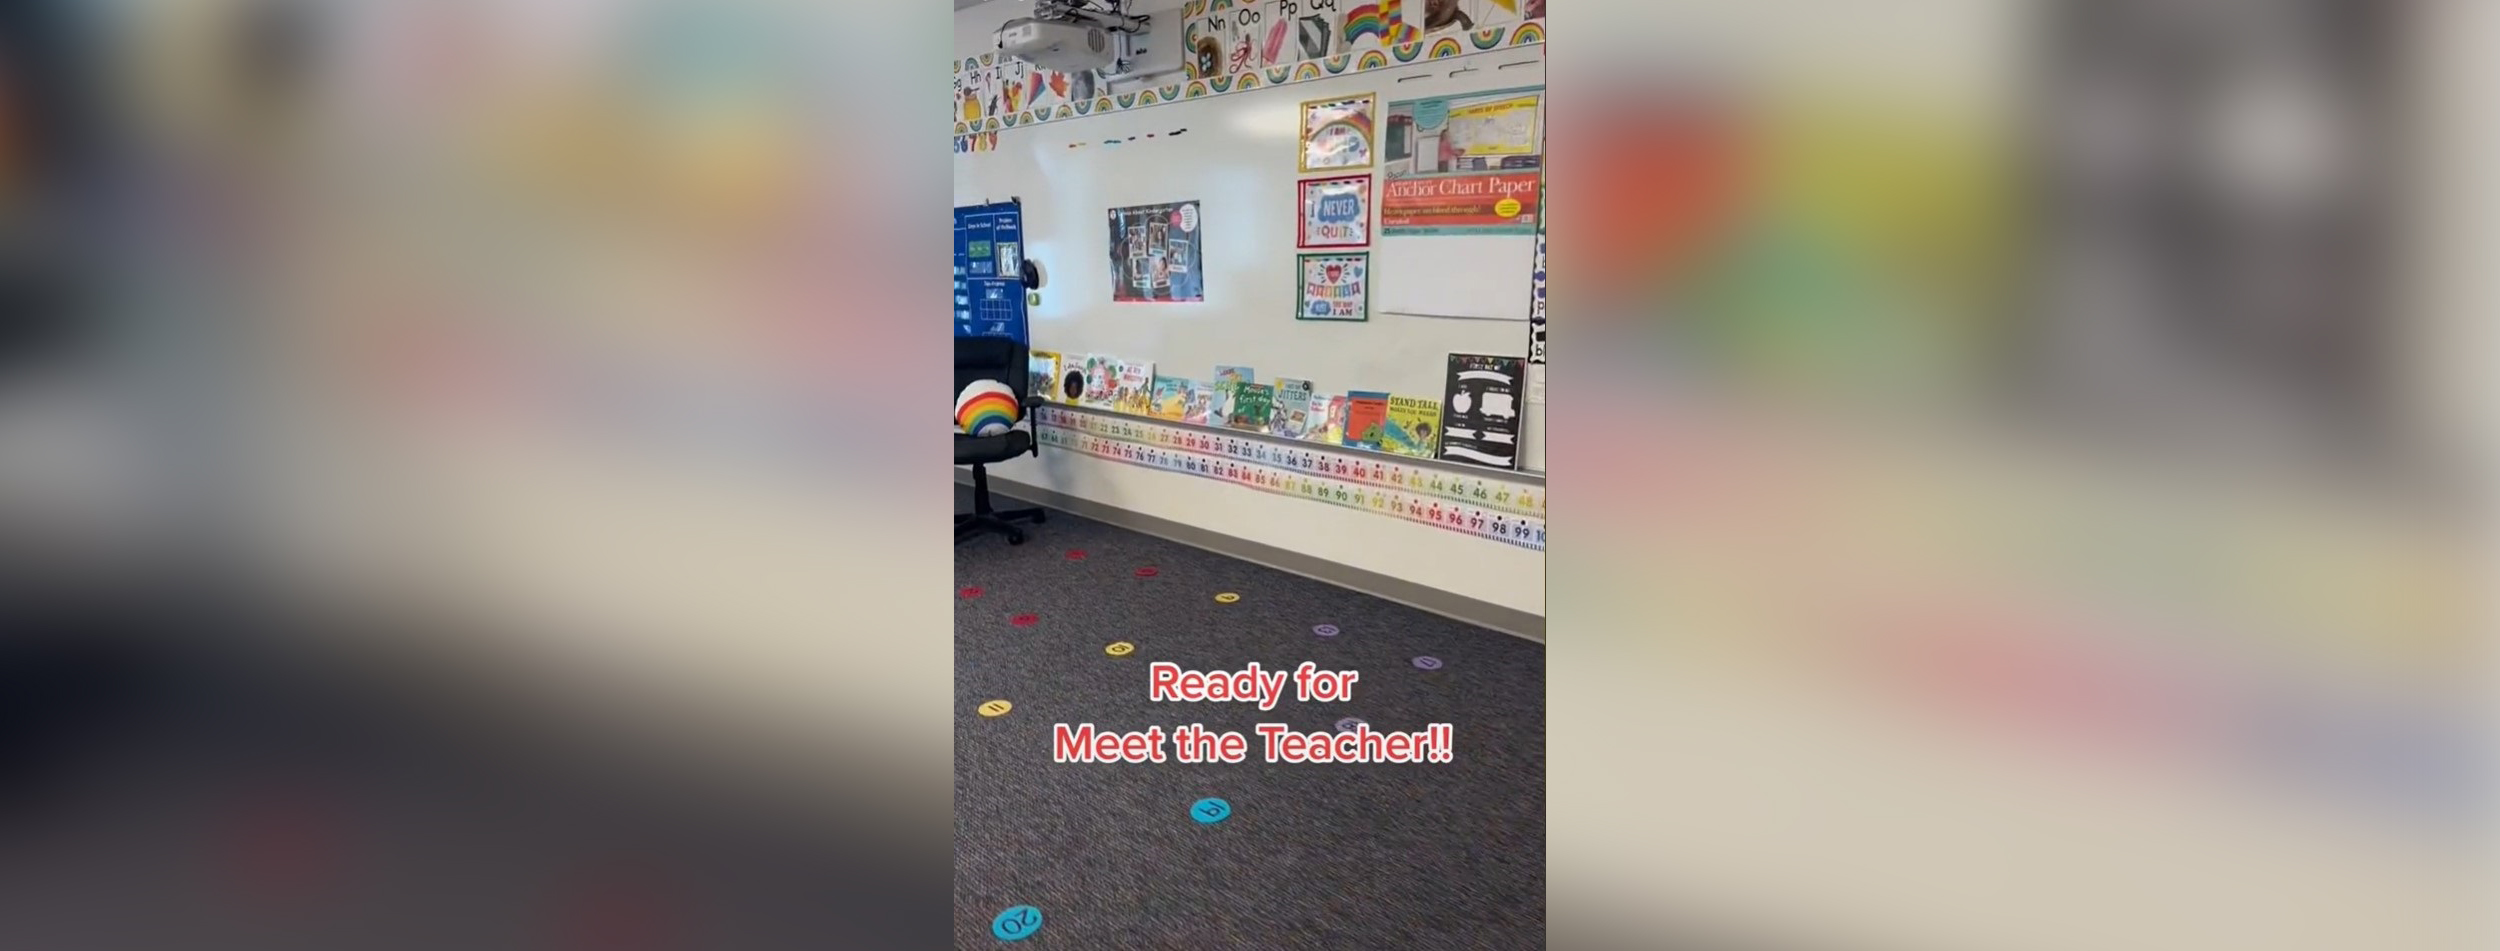 PHOTO: An elementary school teacher in Florida shared videos on TikTok showing her classroom before and after she prepared it for students.
